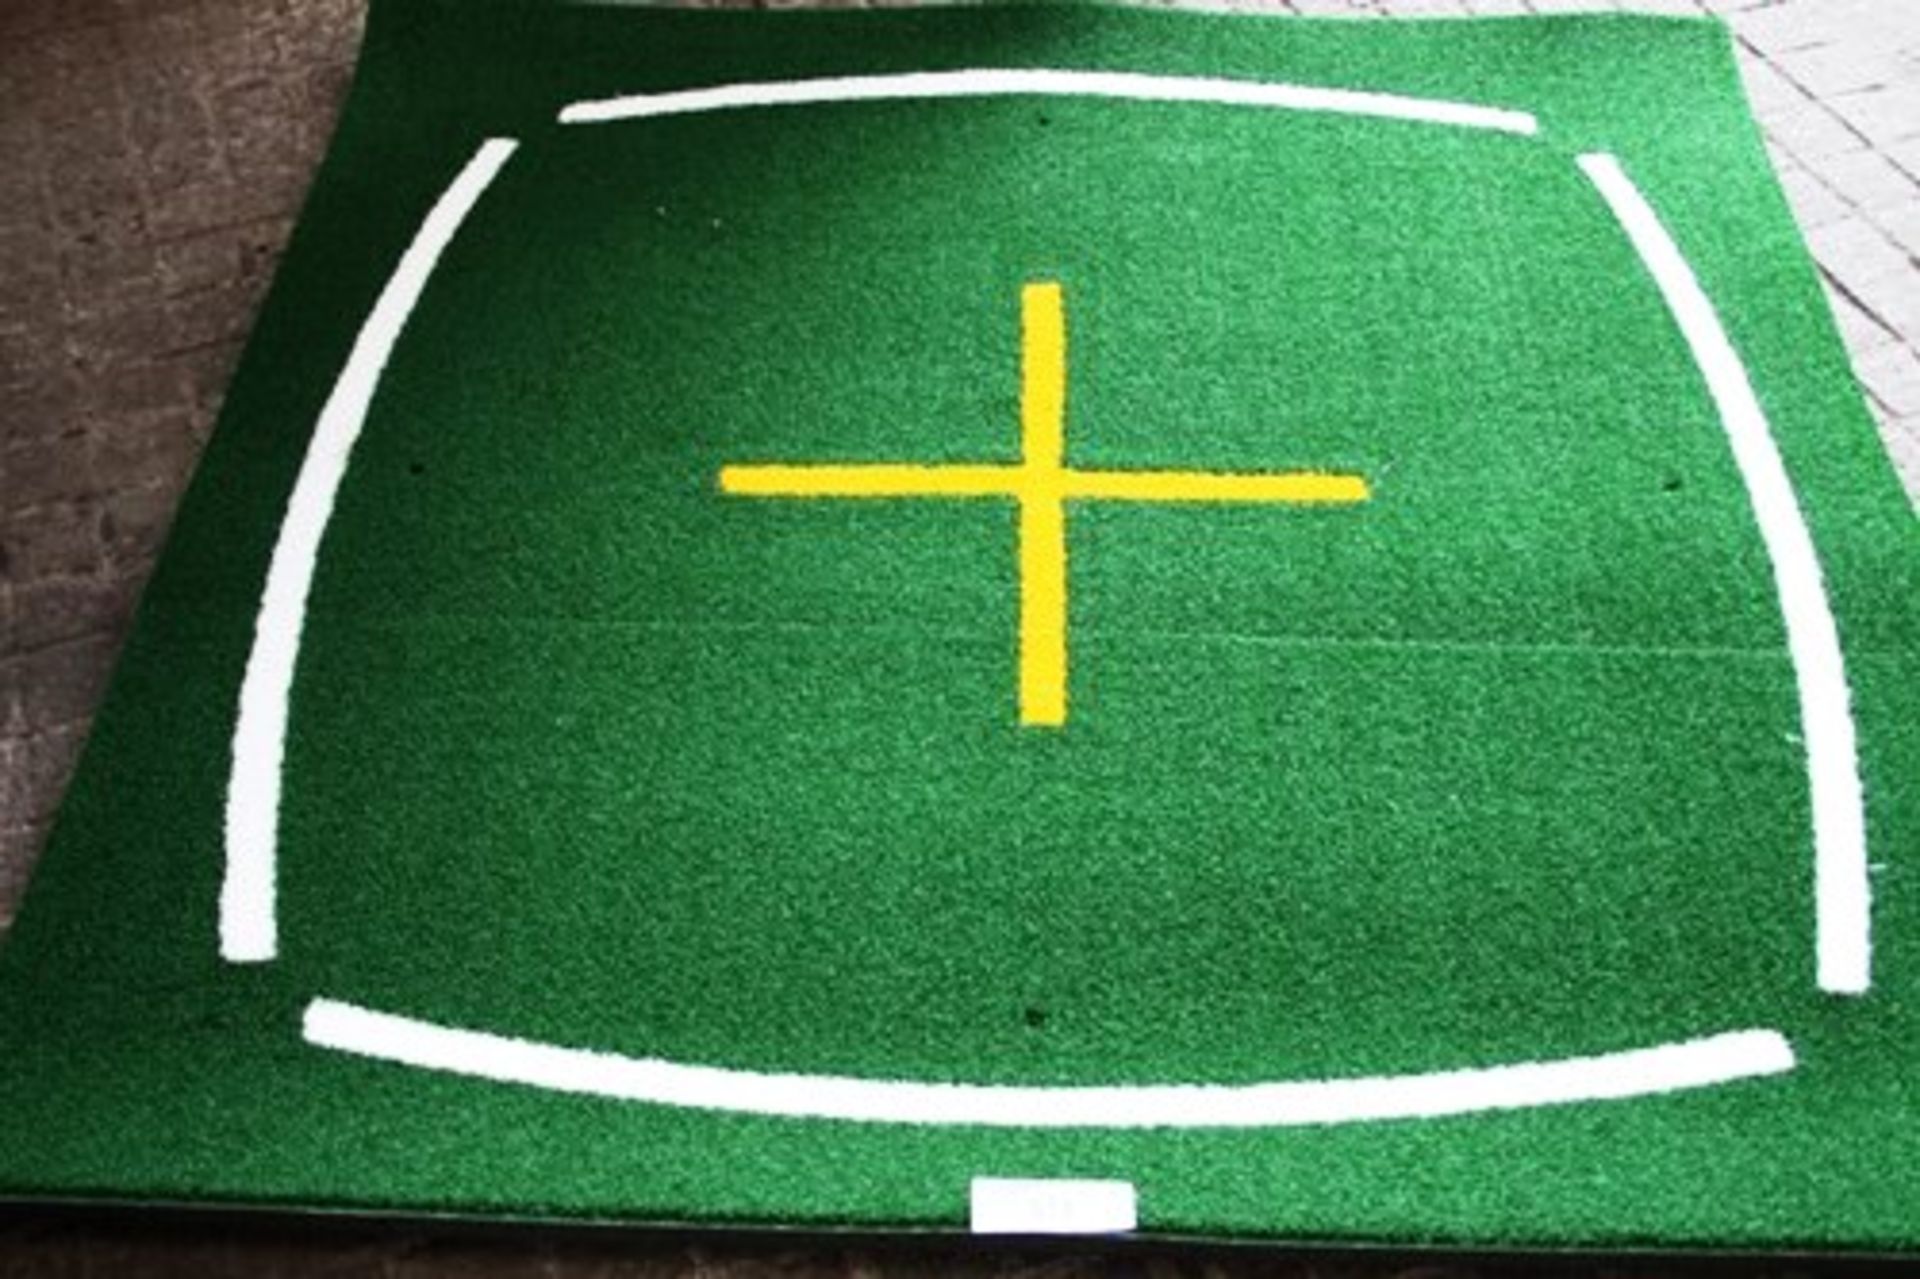 1 x Imax classic golf training mat, 150mm x 150mm - new (Open shed) - Image 2 of 2